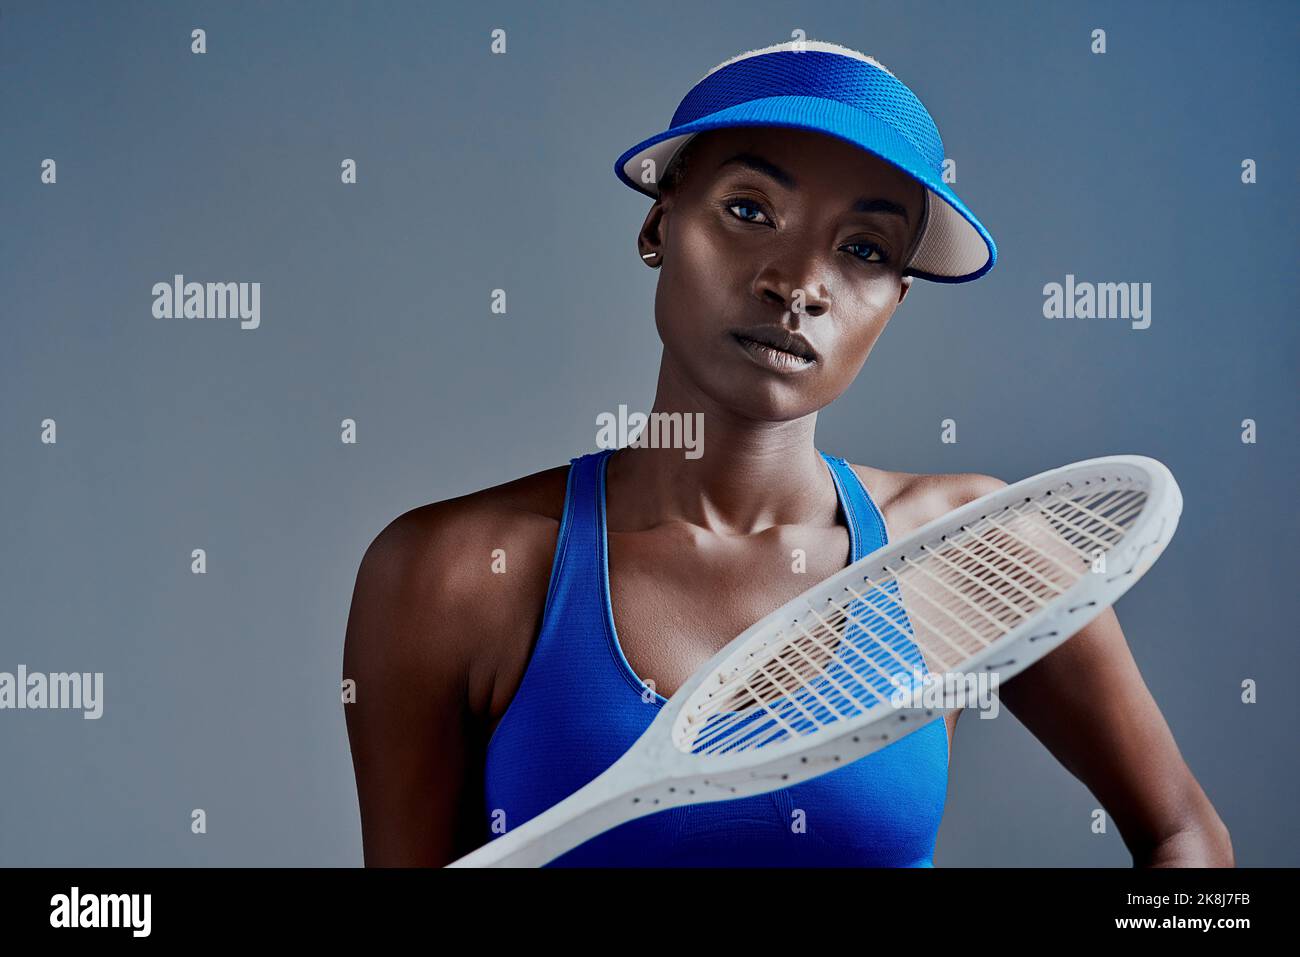 Try your best to be the best. Studio shot of a sporty young woman posing with a tennis racket against a grey background. Stock Photo